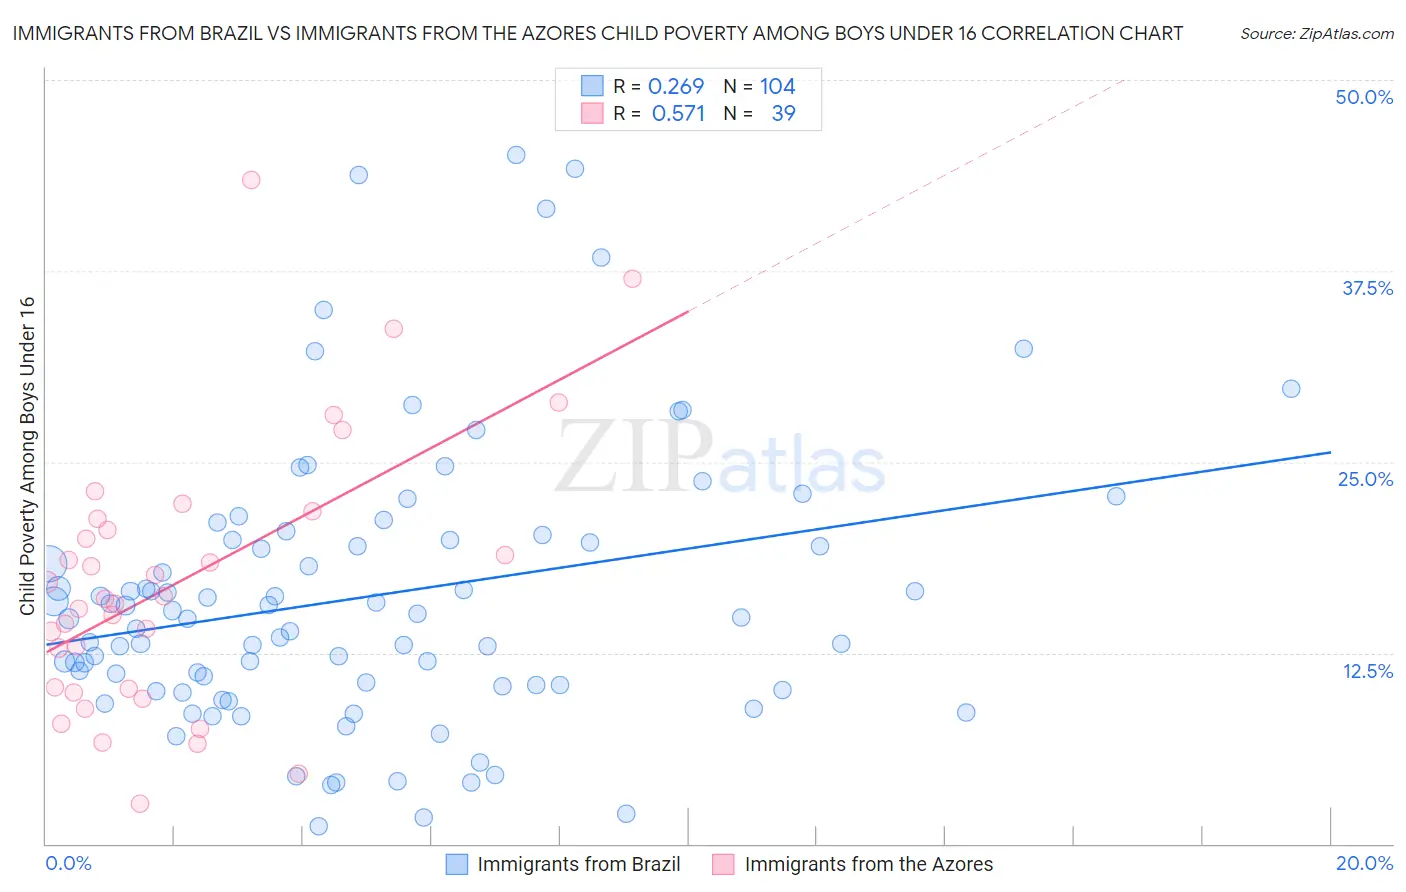 Immigrants from Brazil vs Immigrants from the Azores Child Poverty Among Boys Under 16